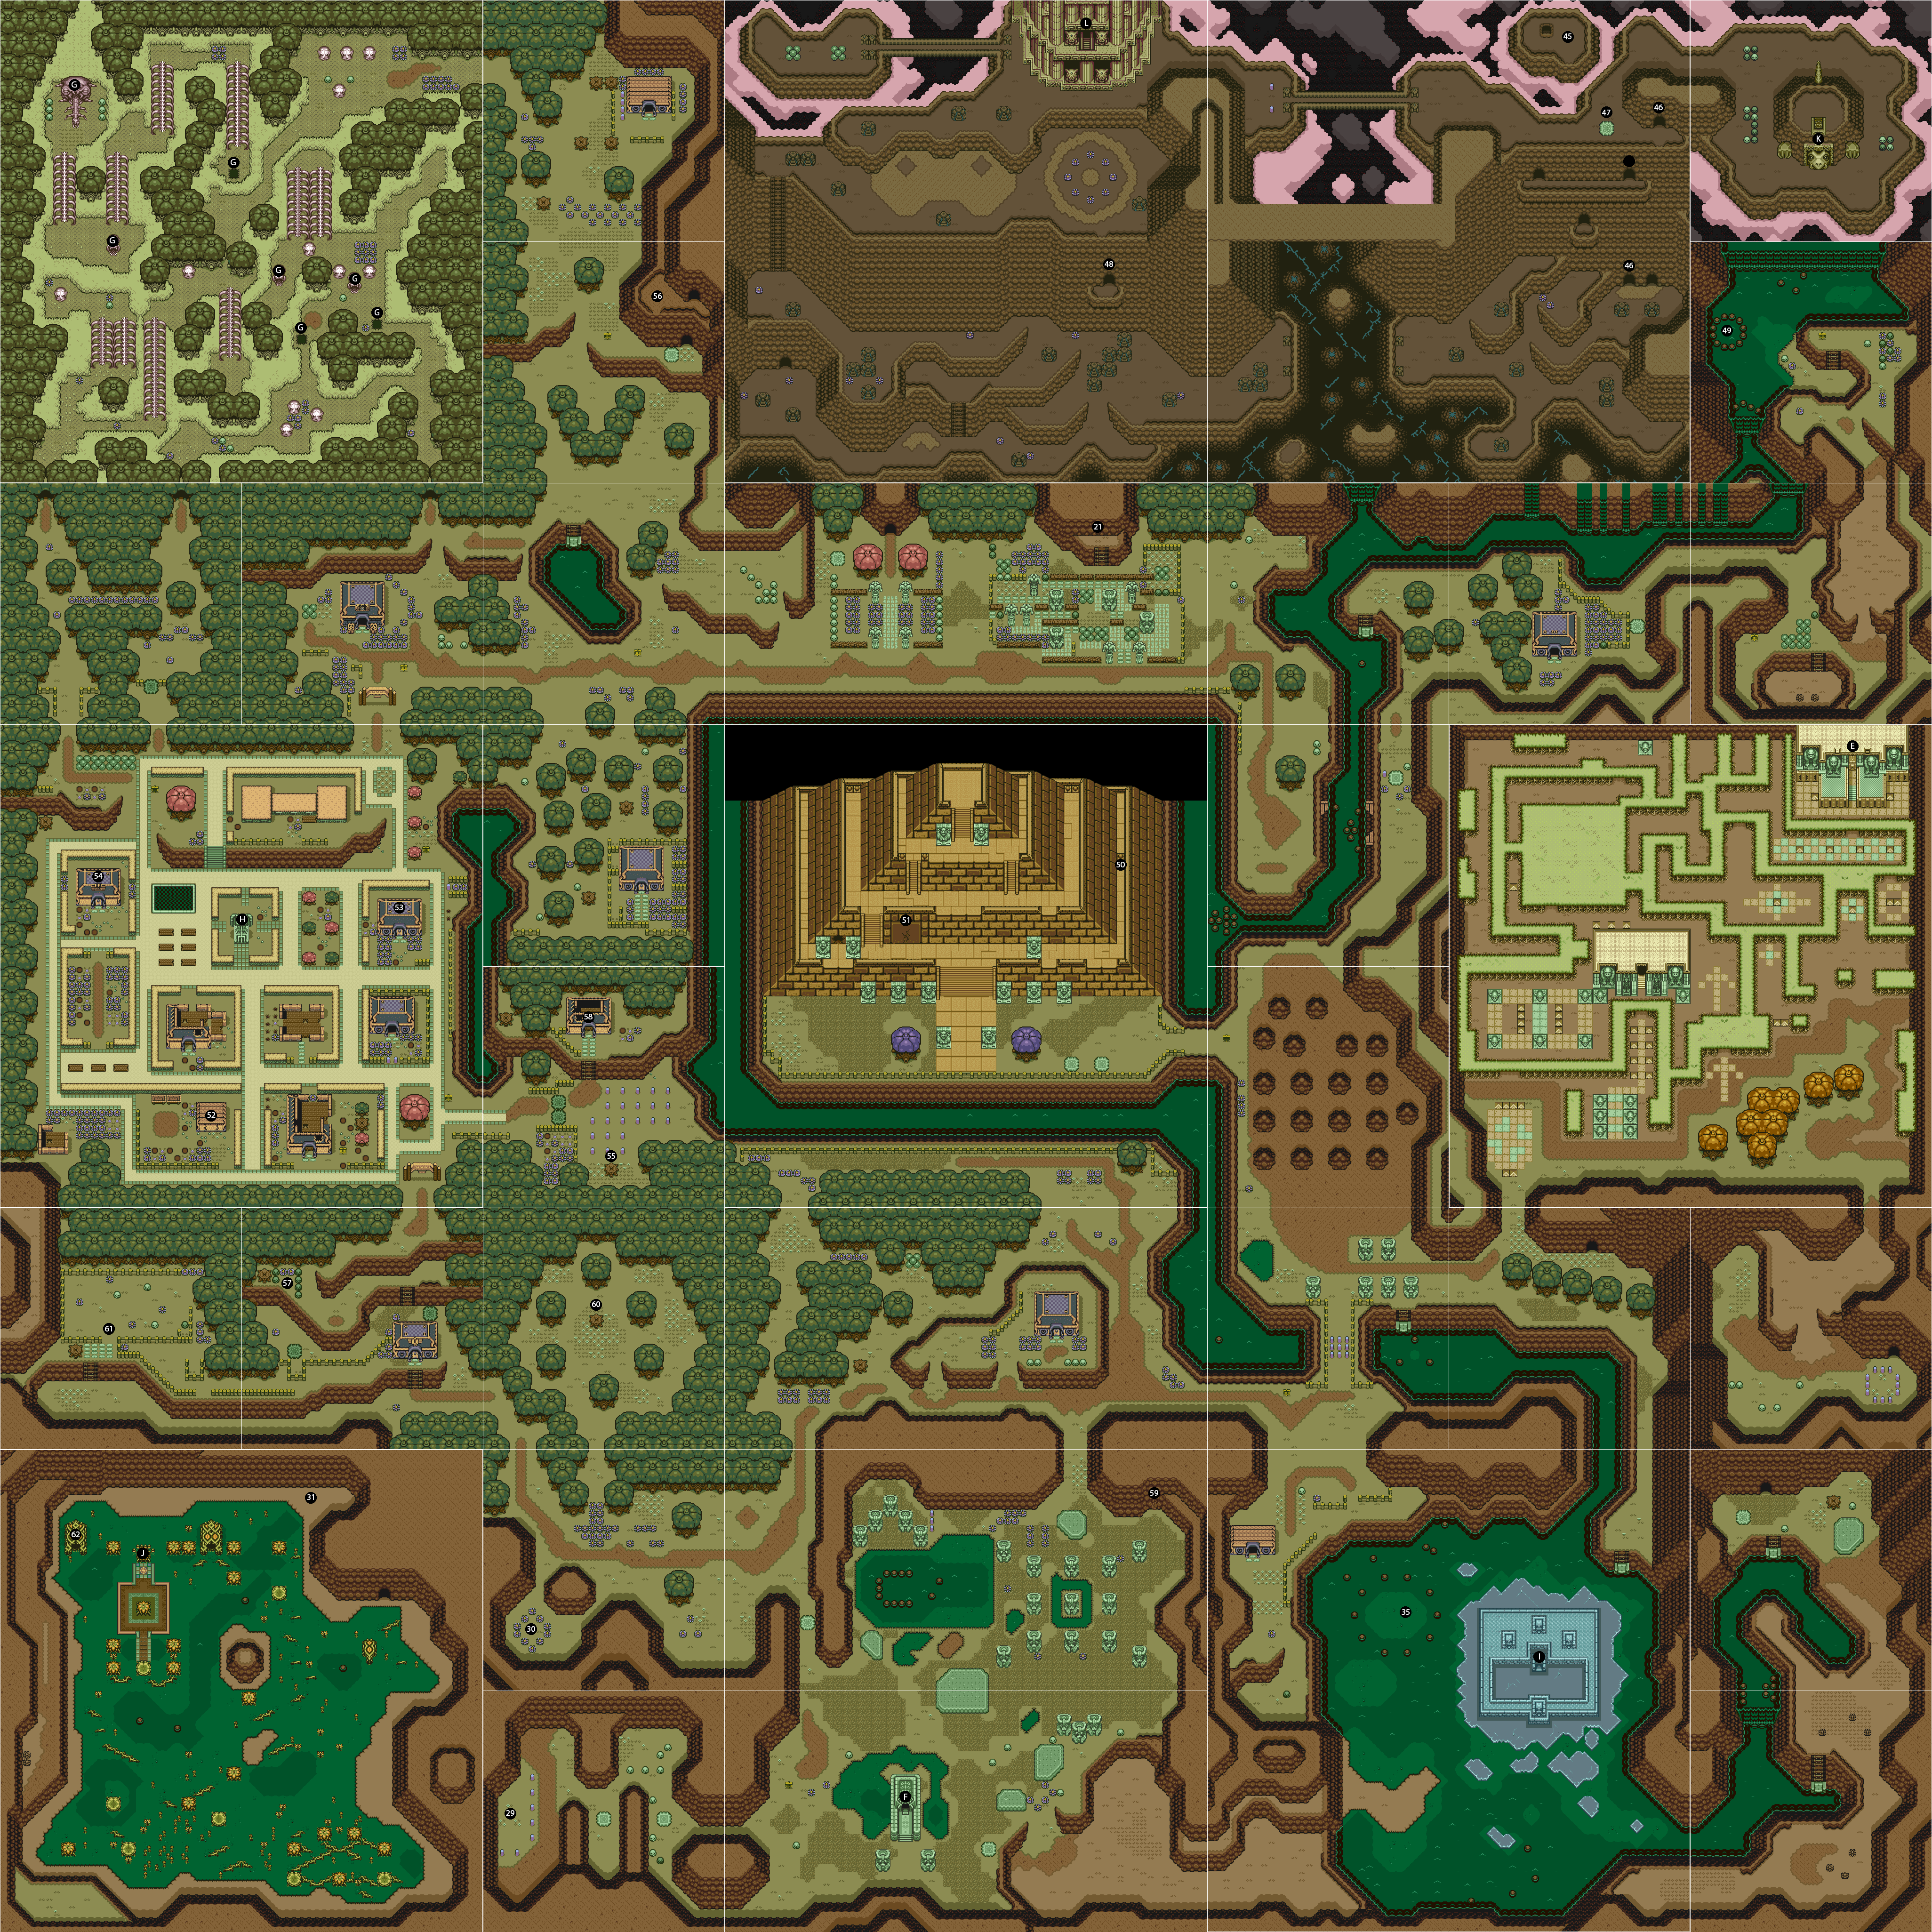 Legend of Zelda, The - A Link to the Past <span class=label